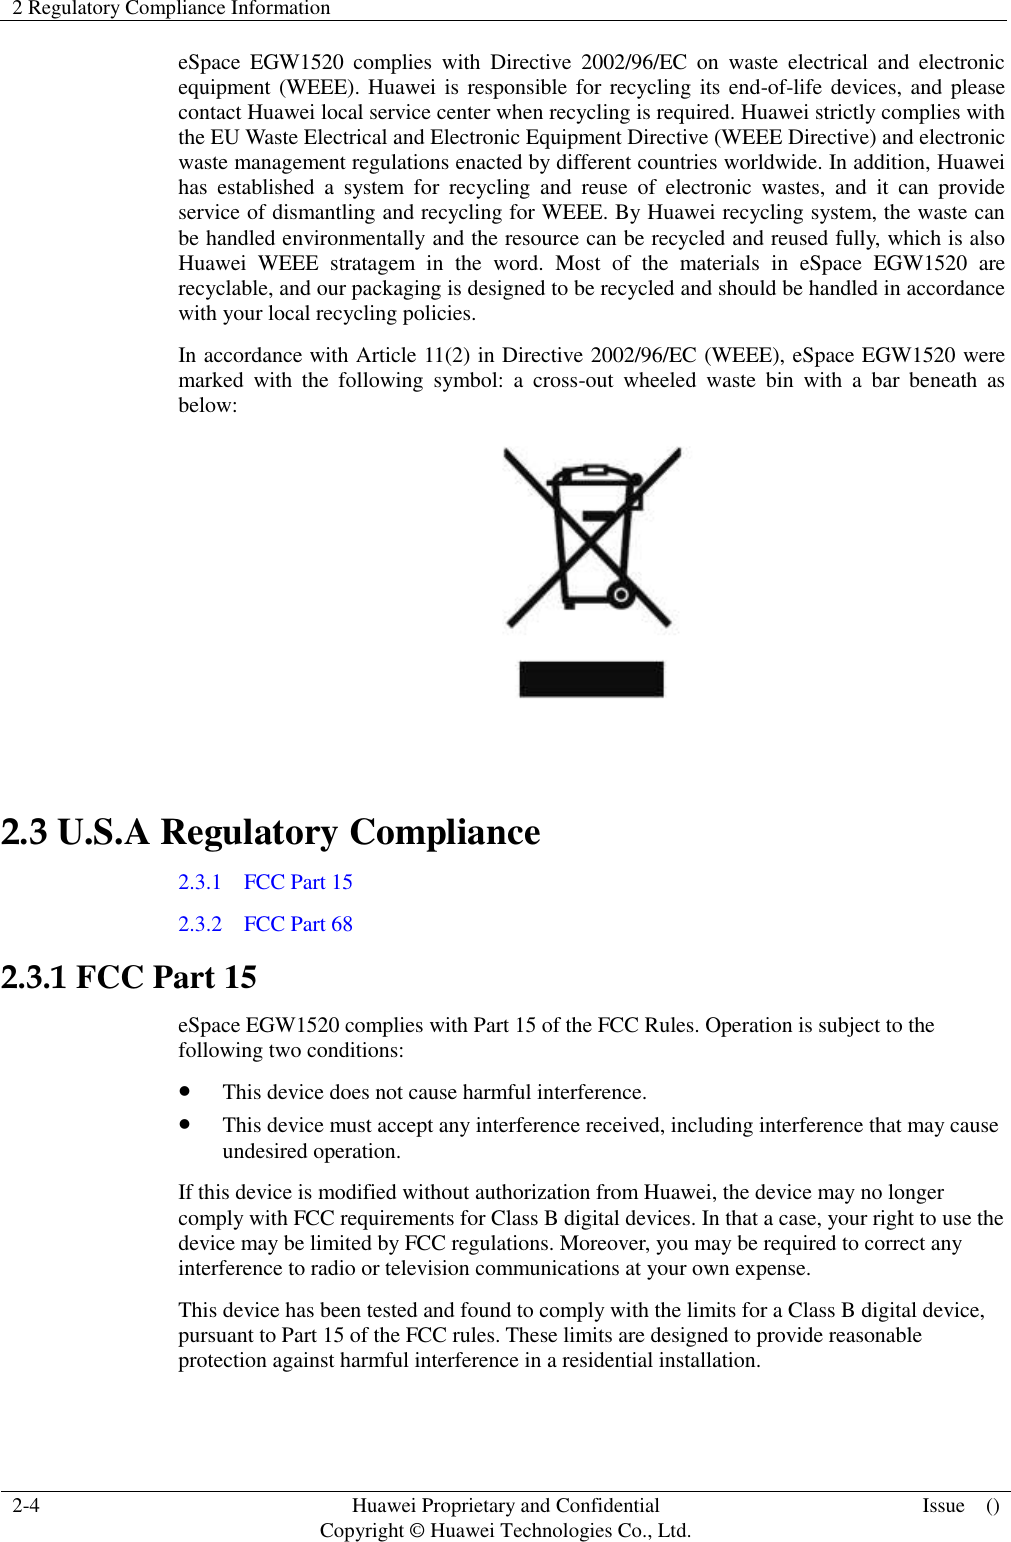 2 Regulatory Compliance Information    2-4 Huawei Proprietary and Confidential                                     Copyright © Huawei Technologies Co., Ltd. Issue    ()  eSpace  EGW1520  complies  with  Directive  2002/96/EC  on  waste  electrical  and  electronic equipment (WEEE). Huawei is responsible for recycling its end-of-life devices, and please contact Huawei local service center when recycling is required. Huawei strictly complies with the EU Waste Electrical and Electronic Equipment Directive (WEEE Directive) and electronic waste management regulations enacted by different countries worldwide. In addition, Huawei has  established  a  system  for  recycling  and  reuse  of  electronic  wastes,  and  it  can  provide service of dismantling and recycling for WEEE. By Huawei recycling system, the waste can be handled environmentally and the resource can be recycled and reused fully, which is also Huawei  WEEE  stratagem  in  the  word.  Most  of  the  materials  in  eSpace  EGW1520  are recyclable, and our packaging is designed to be recycled and should be handled in accordance with your local recycling policies.   In accordance with Article 11(2) in Directive 2002/96/EC (WEEE), eSpace EGW1520 were marked  with  the  following  symbol:  a  cross-out  wheeled  waste  bin  with  a  bar  beneath  as below:   2.3 U.S.A Regulatory Compliance 2.3.1    FCC Part 15 2.3.2    FCC Part 68 2.3.1 FCC Part 15 eSpace EGW1520 complies with Part 15 of the FCC Rules. Operation is subject to the following two conditions:  This device does not cause harmful interference.  This device must accept any interference received, including interference that may cause undesired operation. If this device is modified without authorization from Huawei, the device may no longer comply with FCC requirements for Class B digital devices. In that a case, your right to use the device may be limited by FCC regulations. Moreover, you may be required to correct any interference to radio or television communications at your own expense. This device has been tested and found to comply with the limits for a Class B digital device, pursuant to Part 15 of the FCC rules. These limits are designed to provide reasonable protection against harmful interference in a residential installation. 